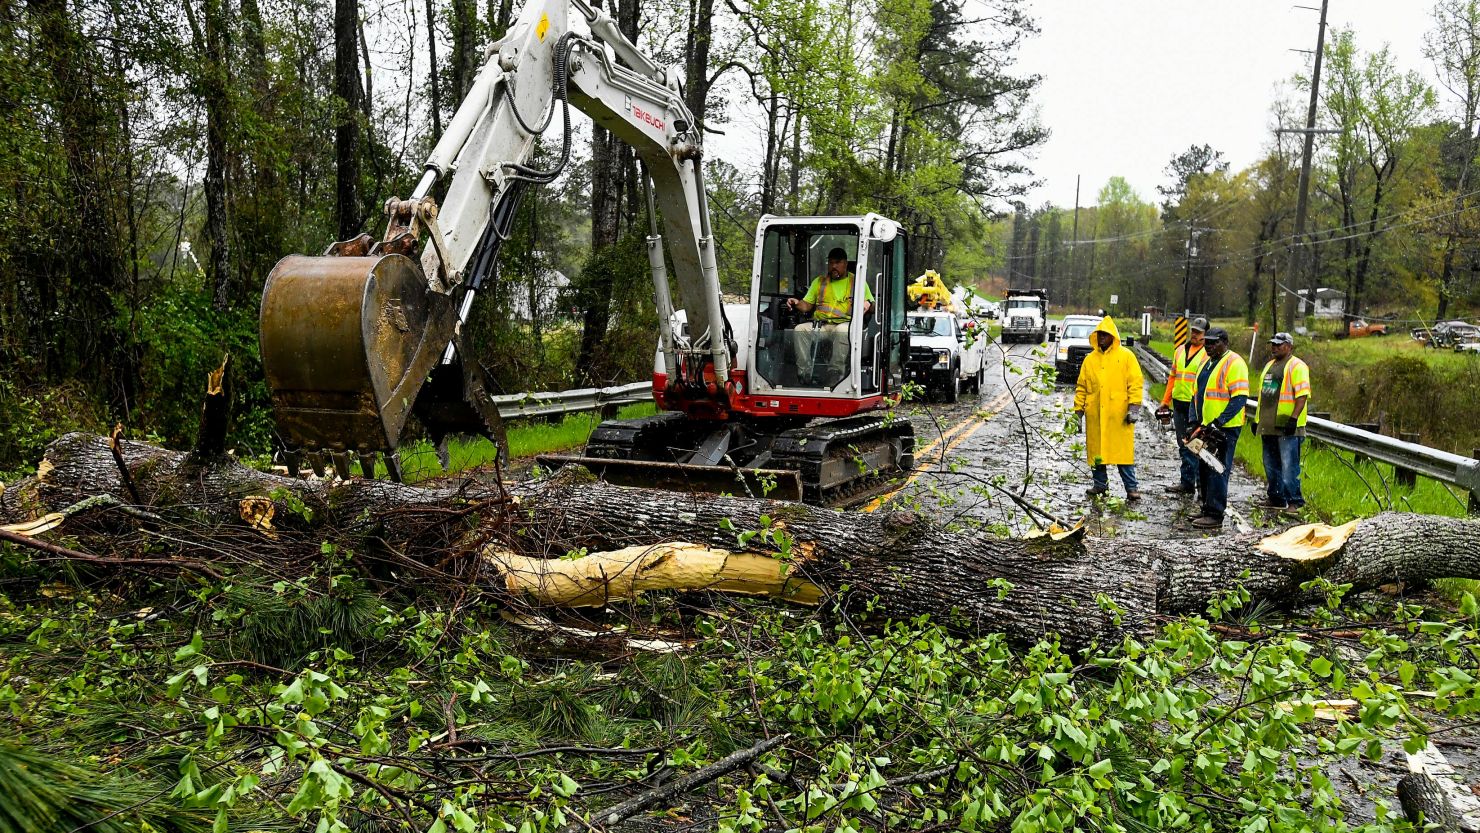 Workers clear downed trees after a storm hit  near the Alabama community of Wetumpka on Tuesday.